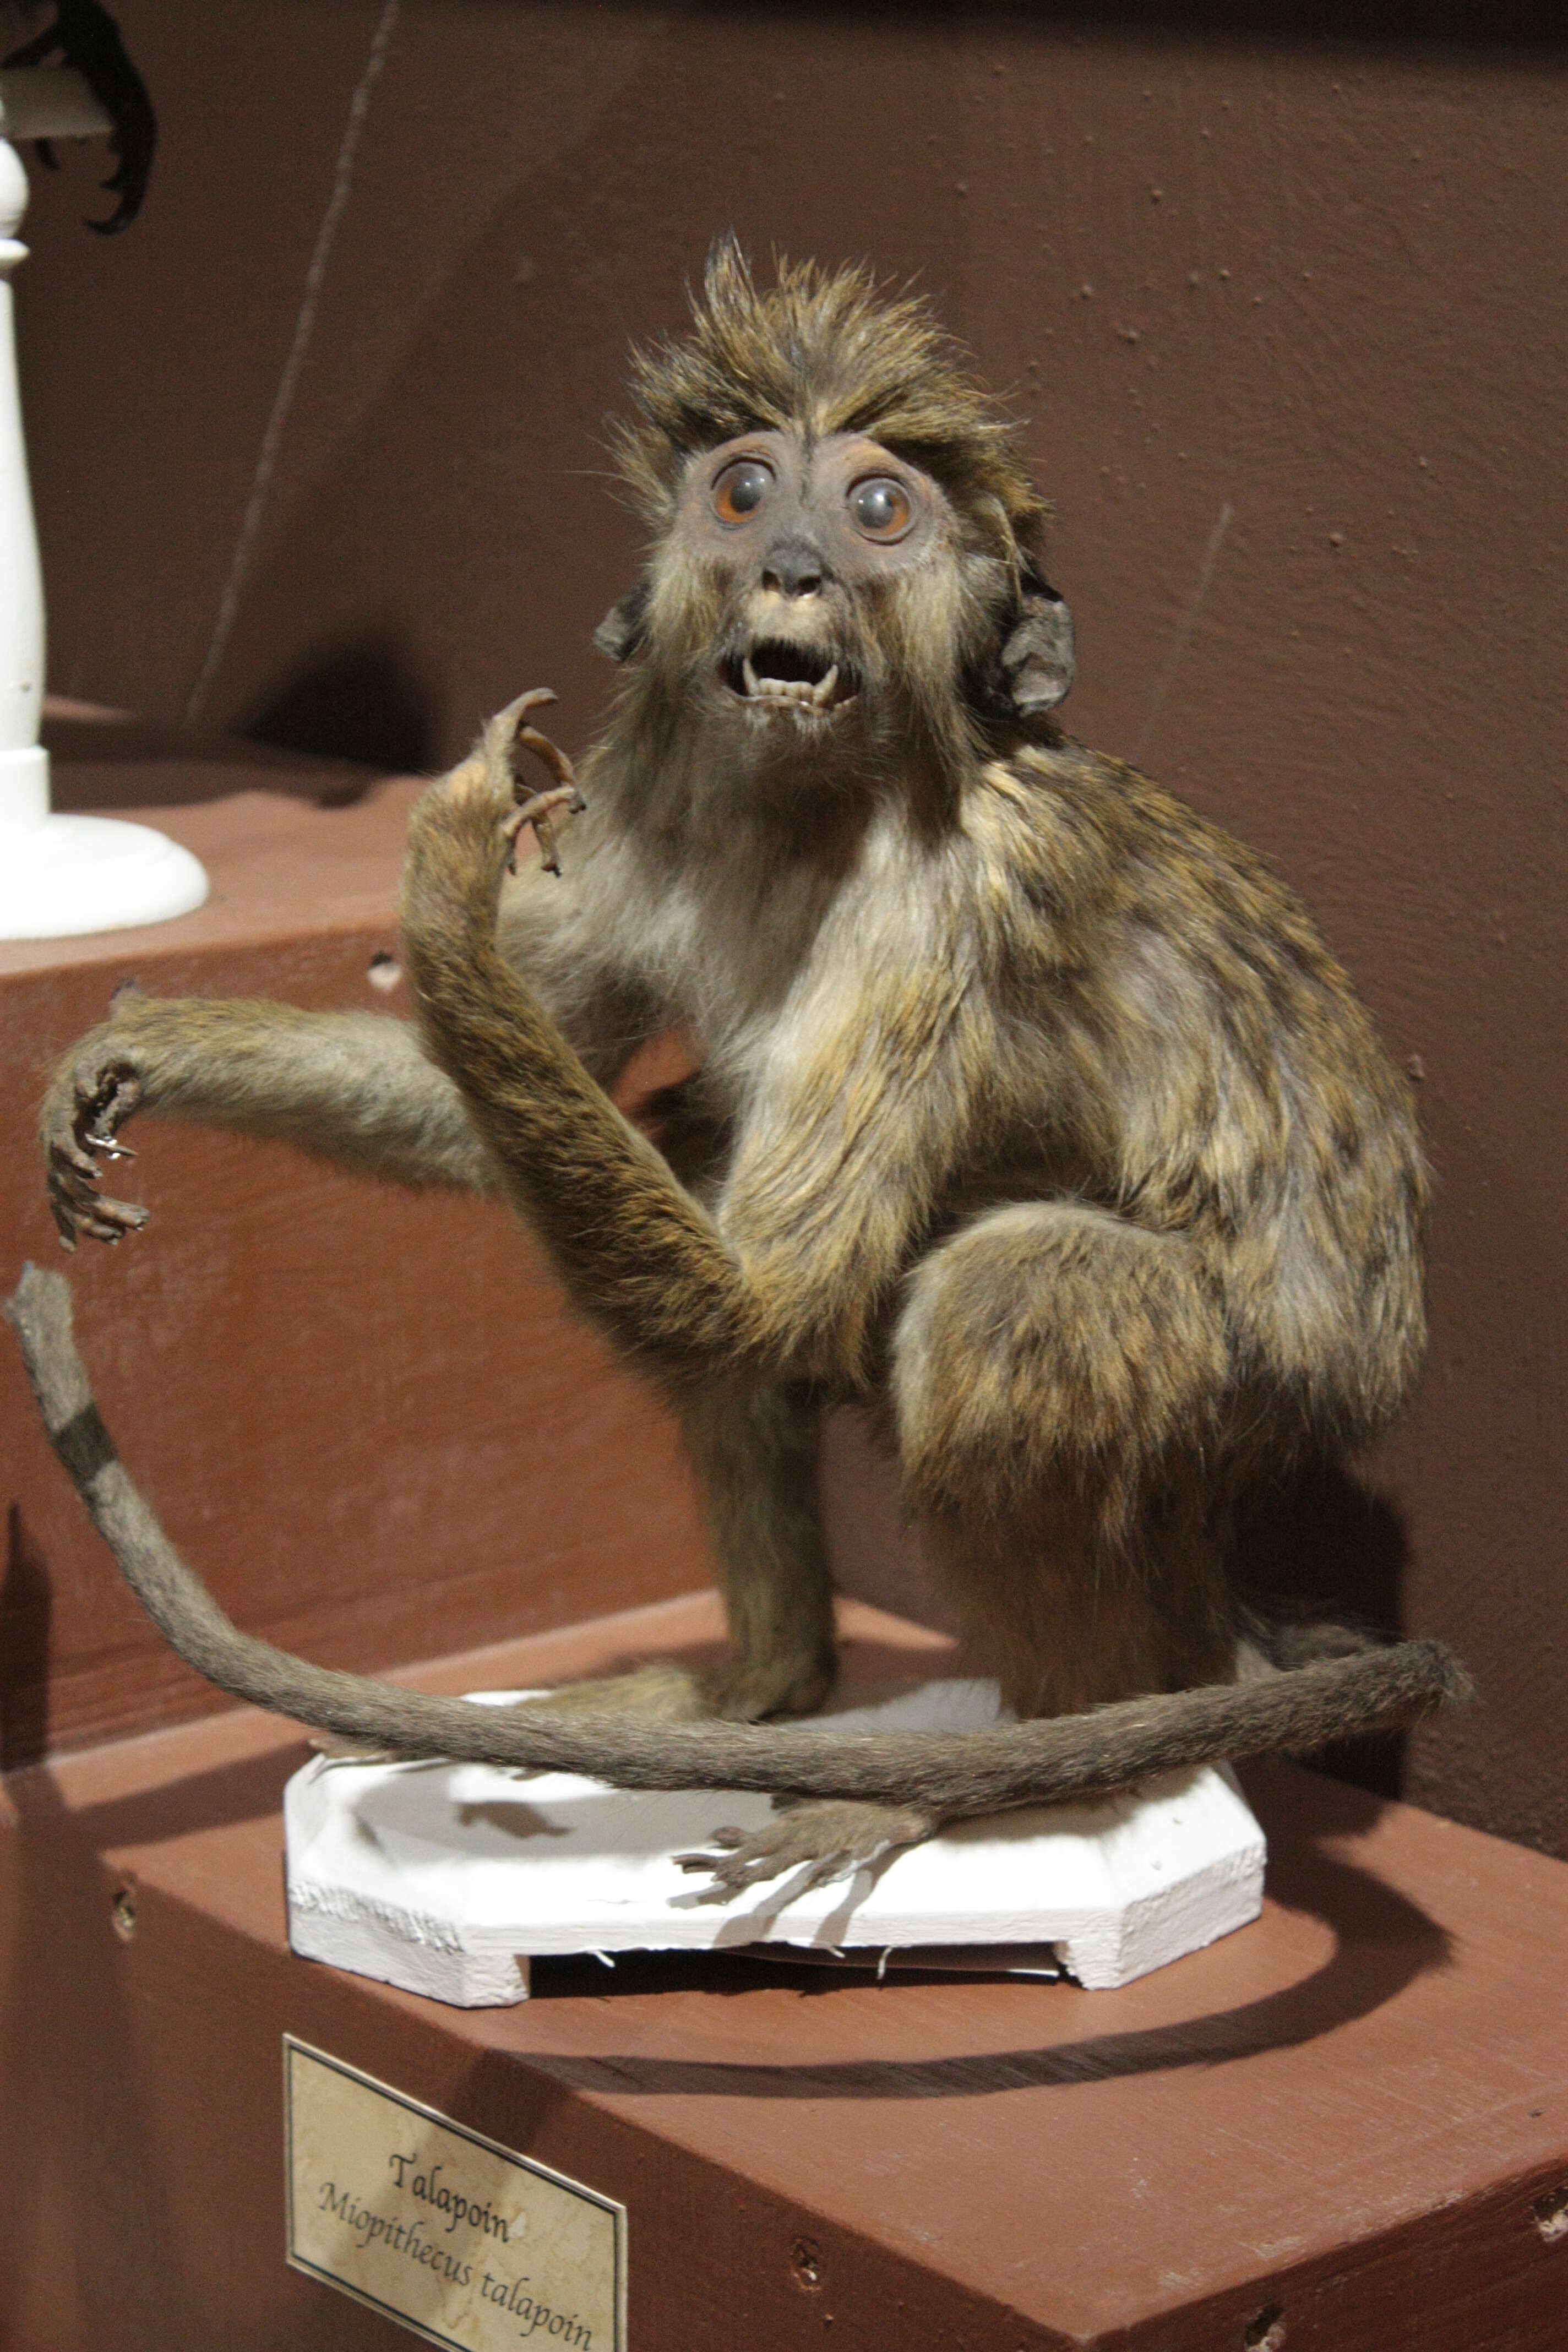 Image of Angolan Talapoin